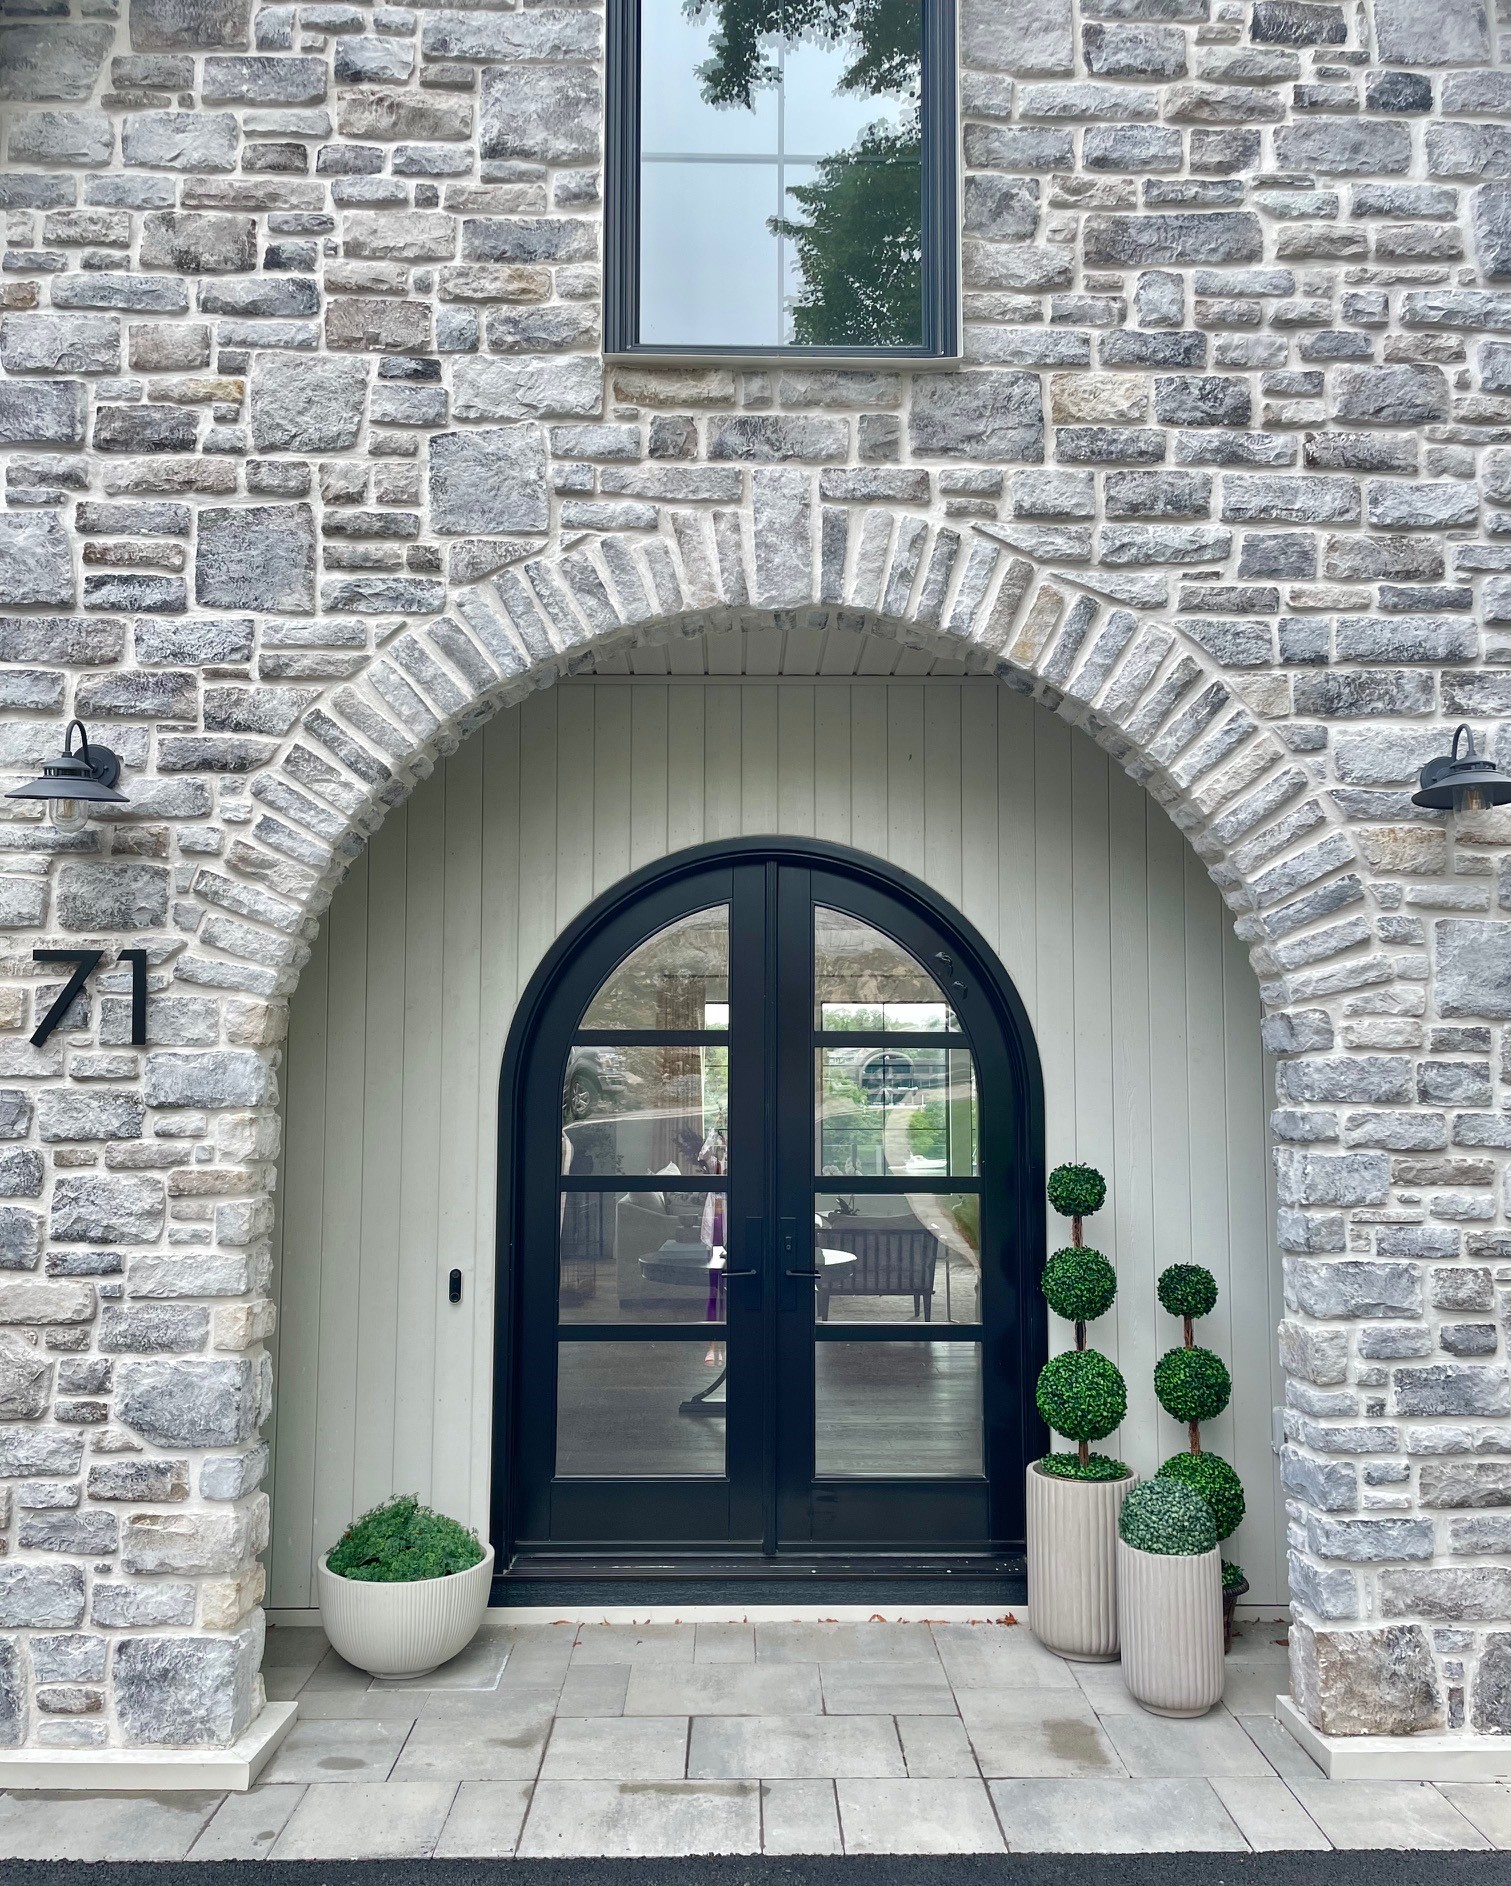 A stunning stone arch and thoughtfully placed greenery and topiaries greets guests as they enter the home